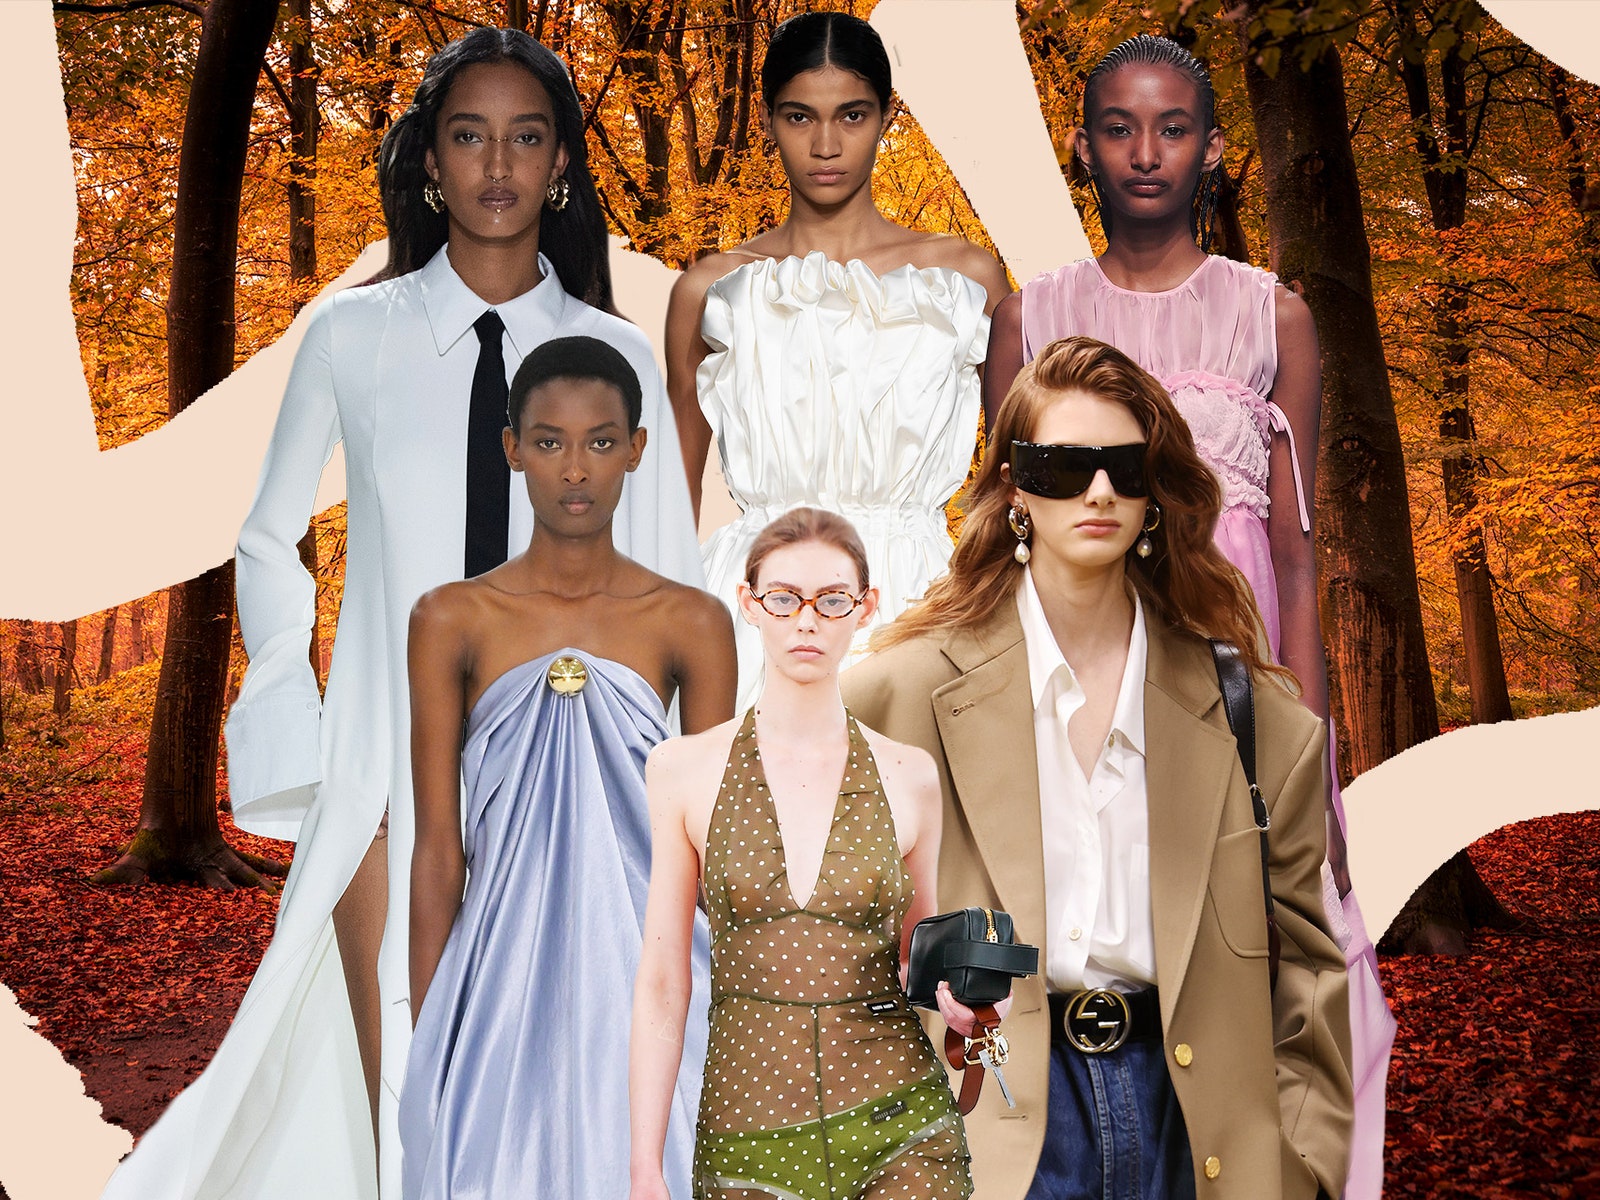 13 autumn fashion trends you need to know about now (because this heatwave is only fleeting!)